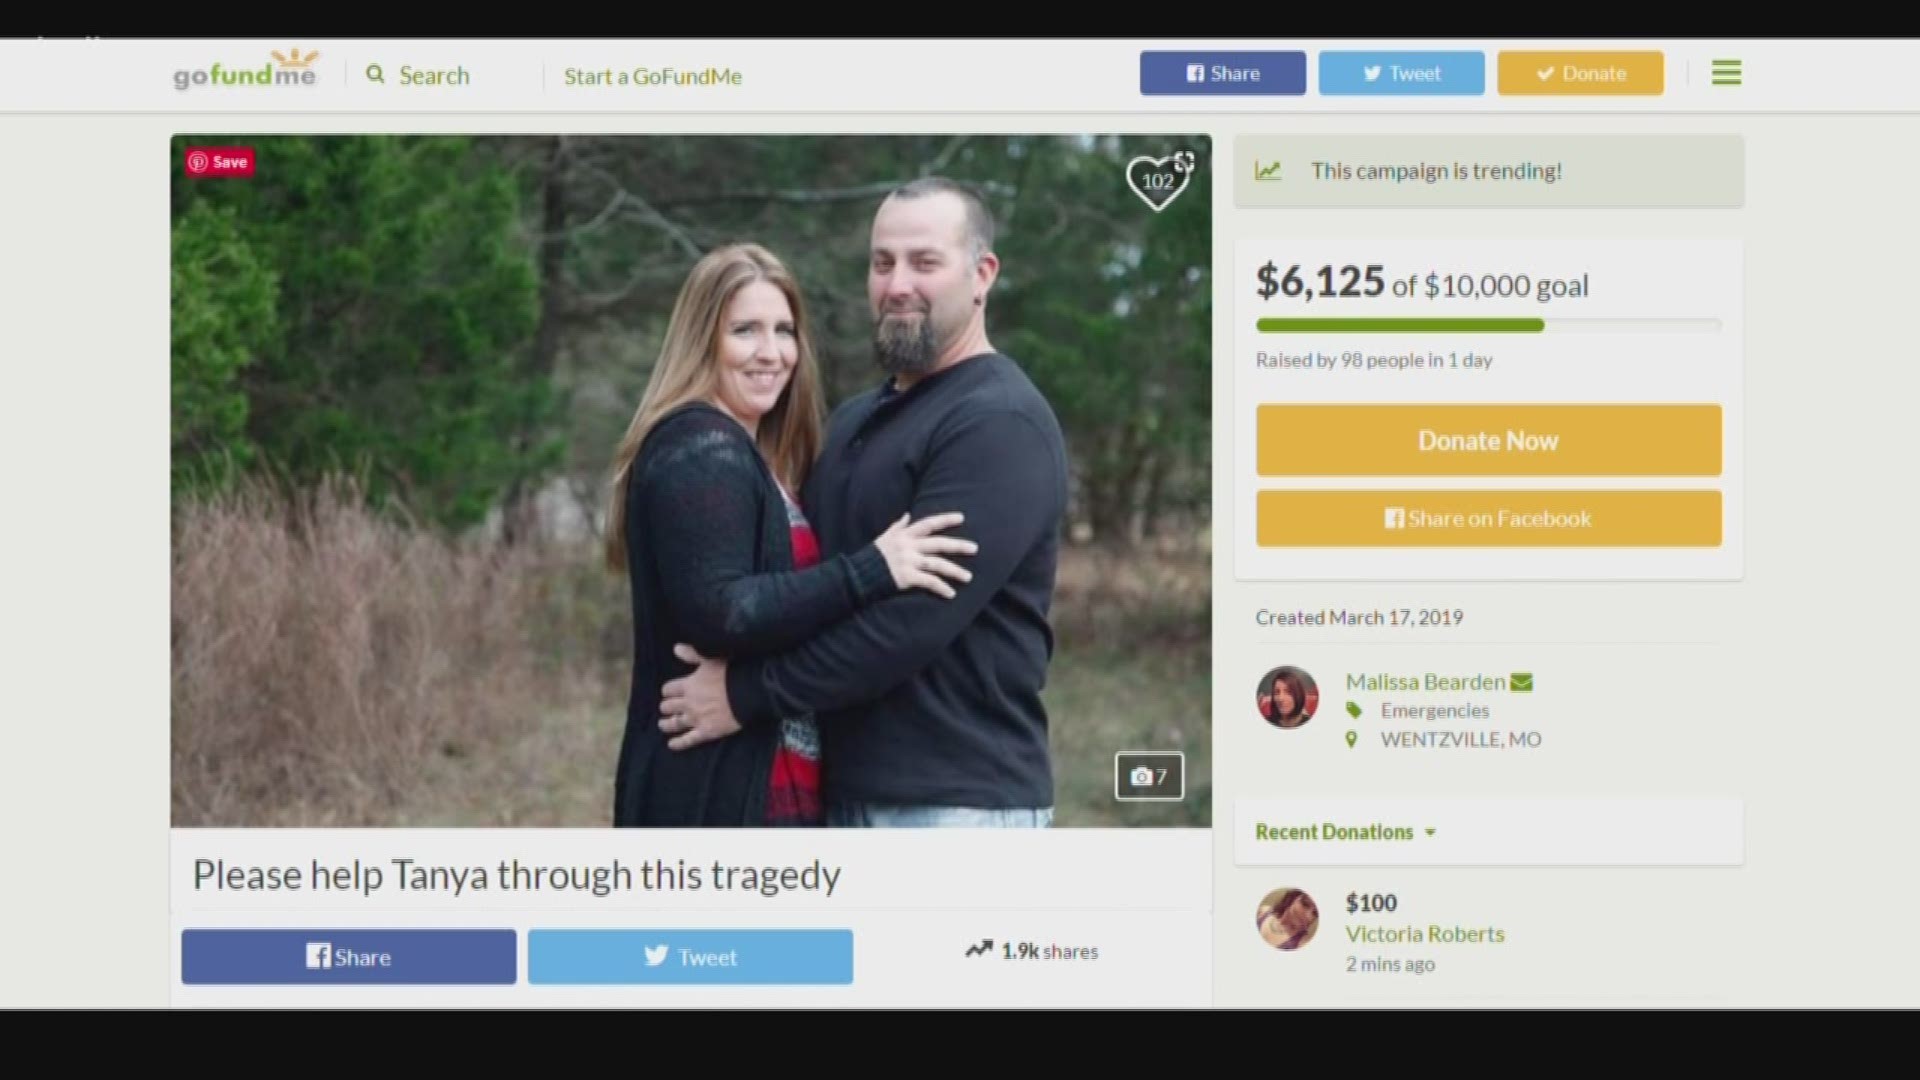 A Warren County community is coming together to raise money for a local family after a deadly motorcycle accident.